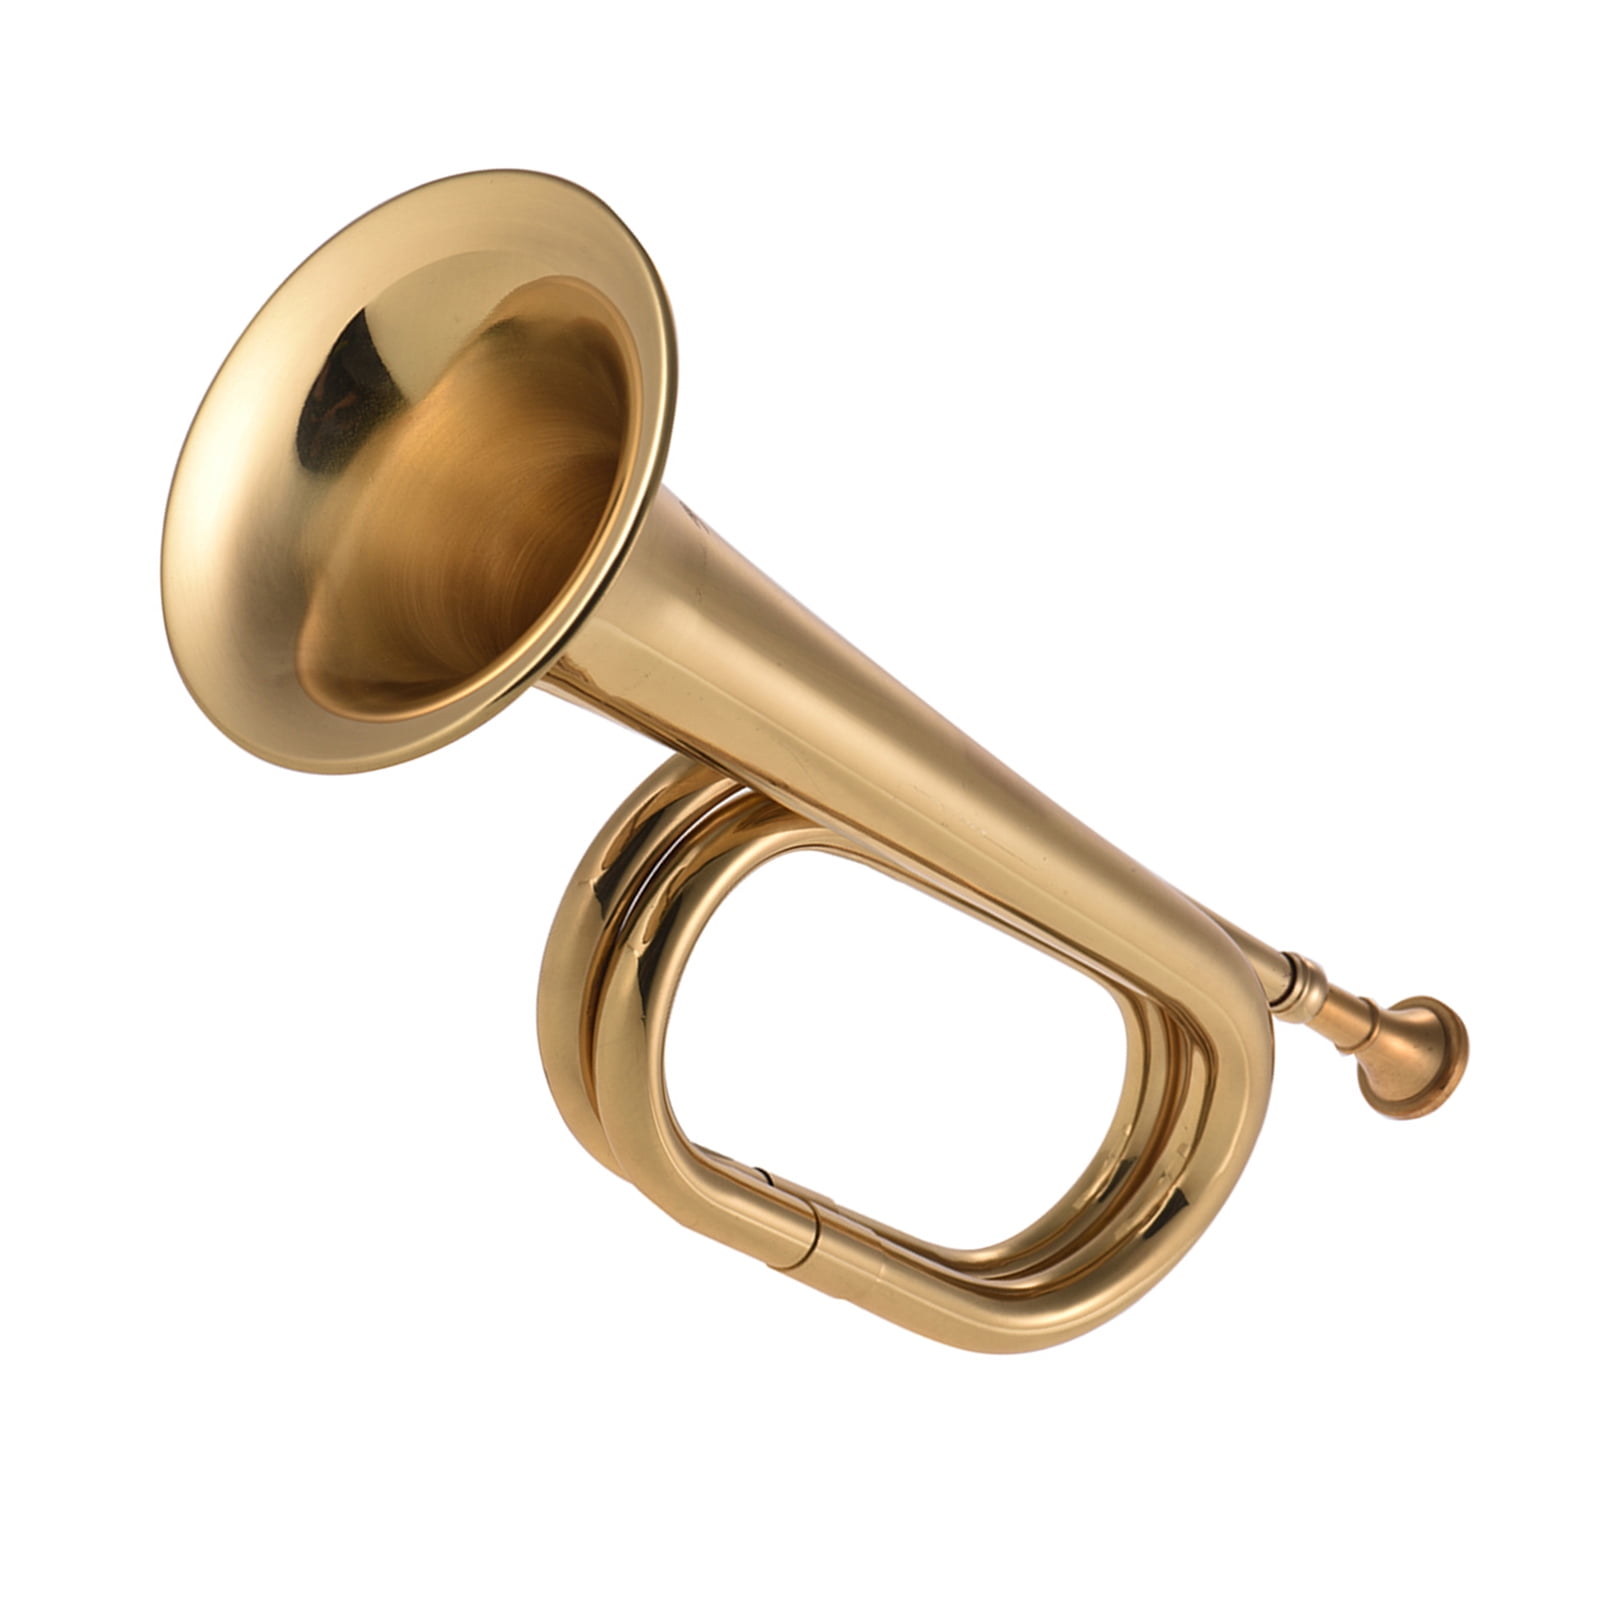 B Flat Bugle Call Trumpet Cavalry Horn Brass Instrument with Mouthpiece for School Band